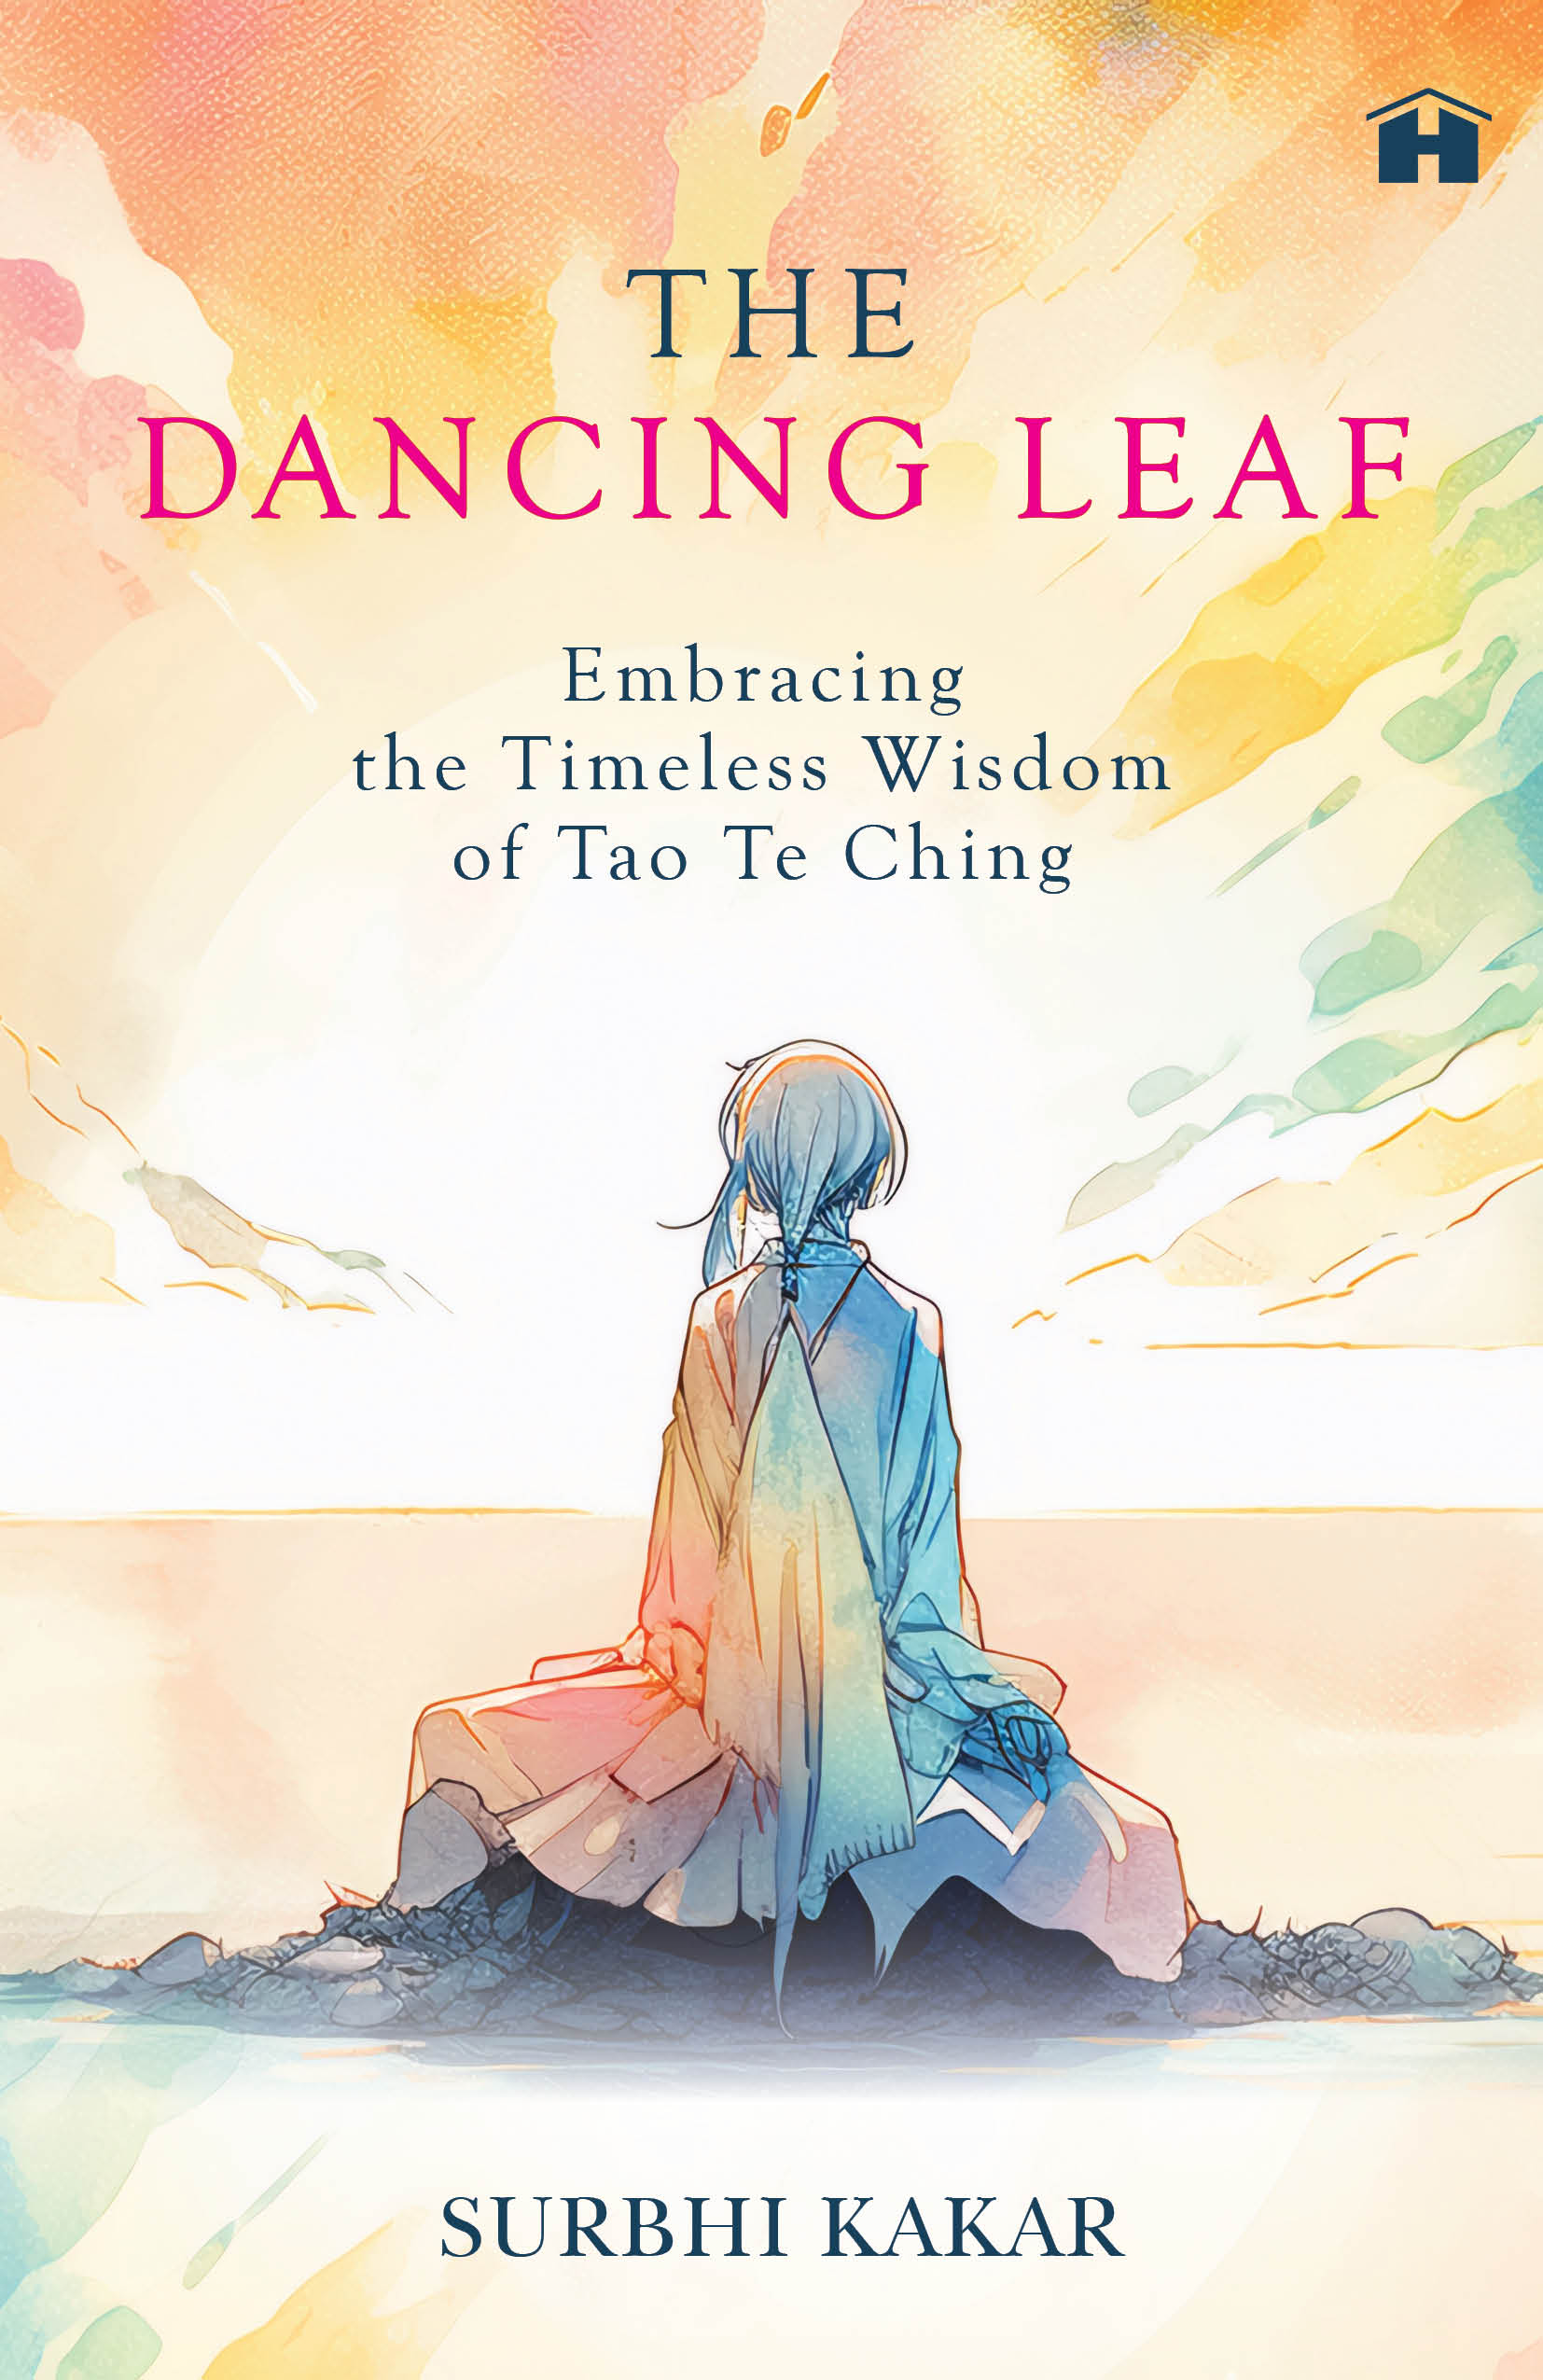 The Dancing Leaf: Embracing Timeless Wisdom of Tao Te Ching